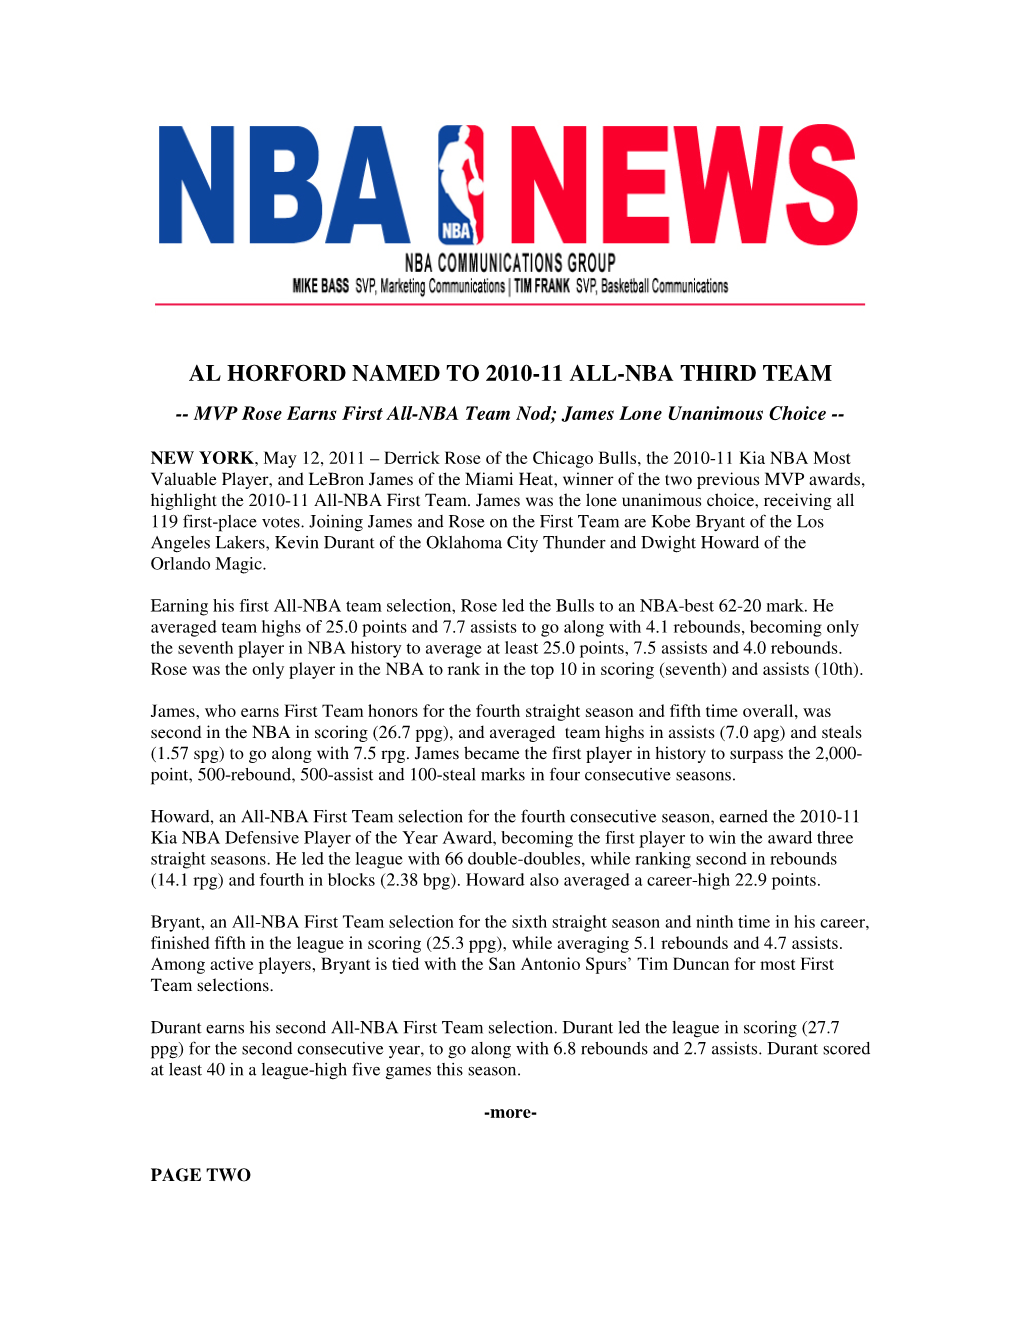 Al Horford Named to 2010-11 All-Nba Third Team